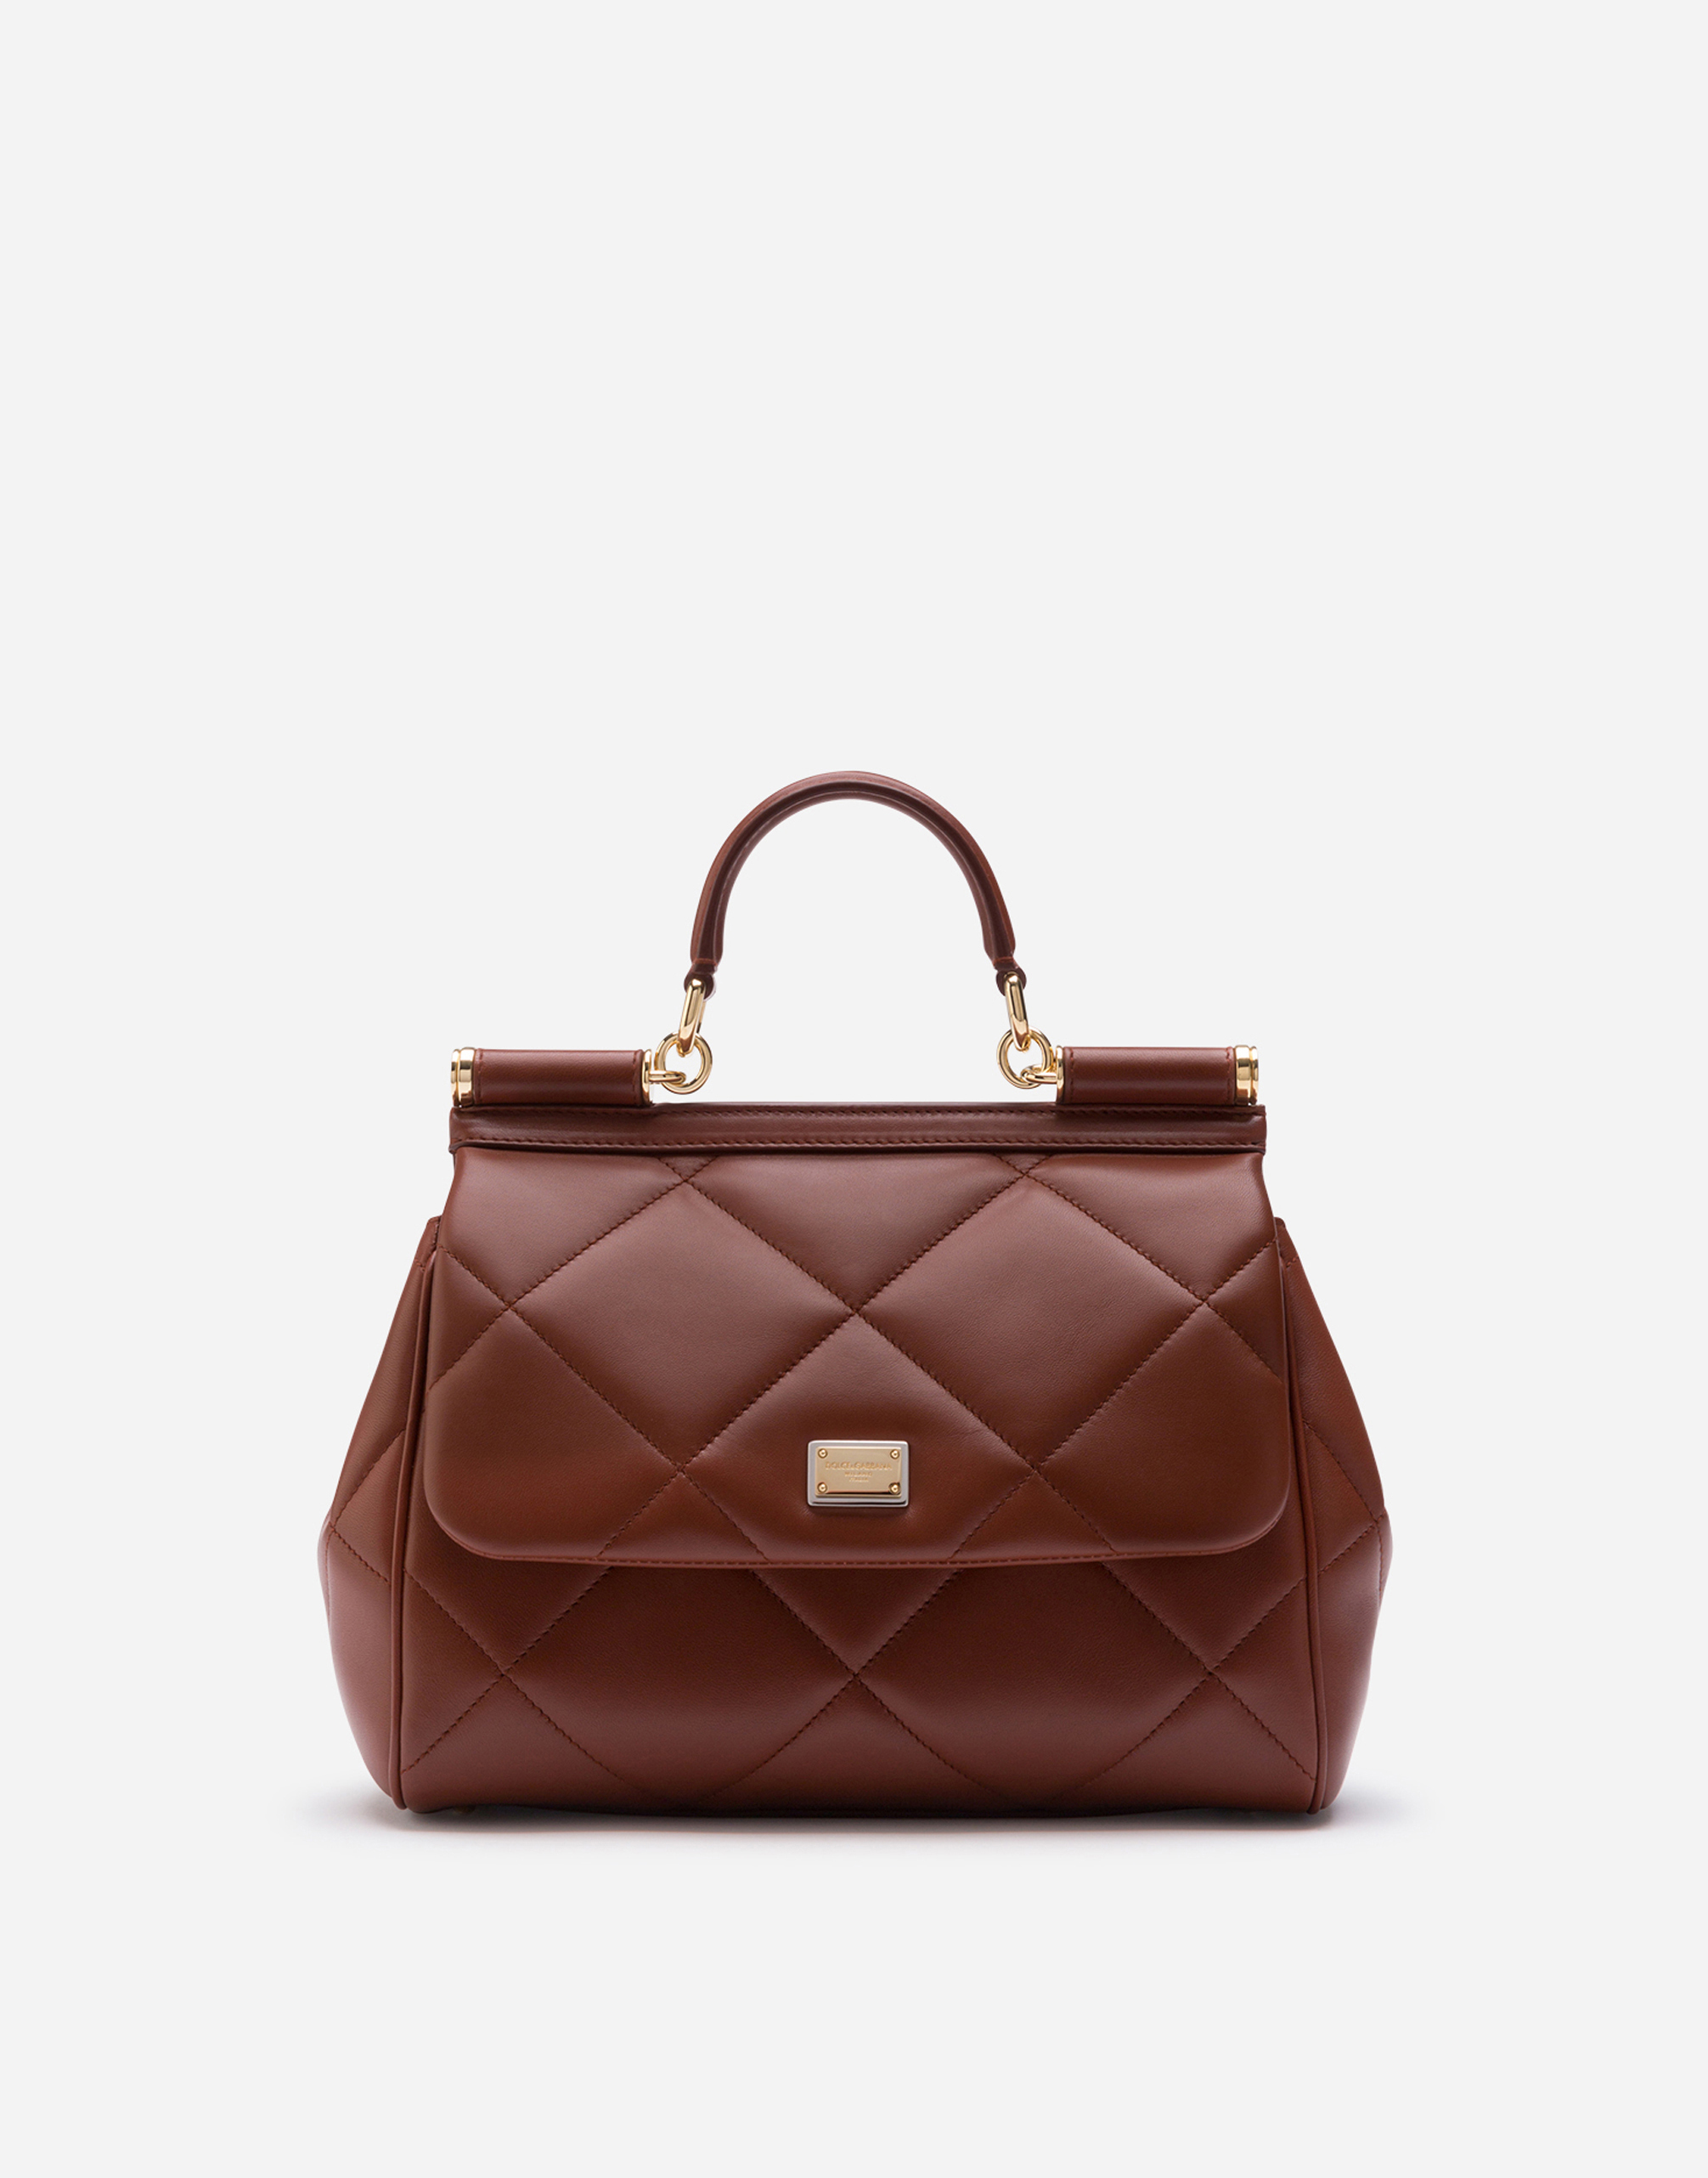 Medium Sicily bag in quilted Aria calfskin in Brown